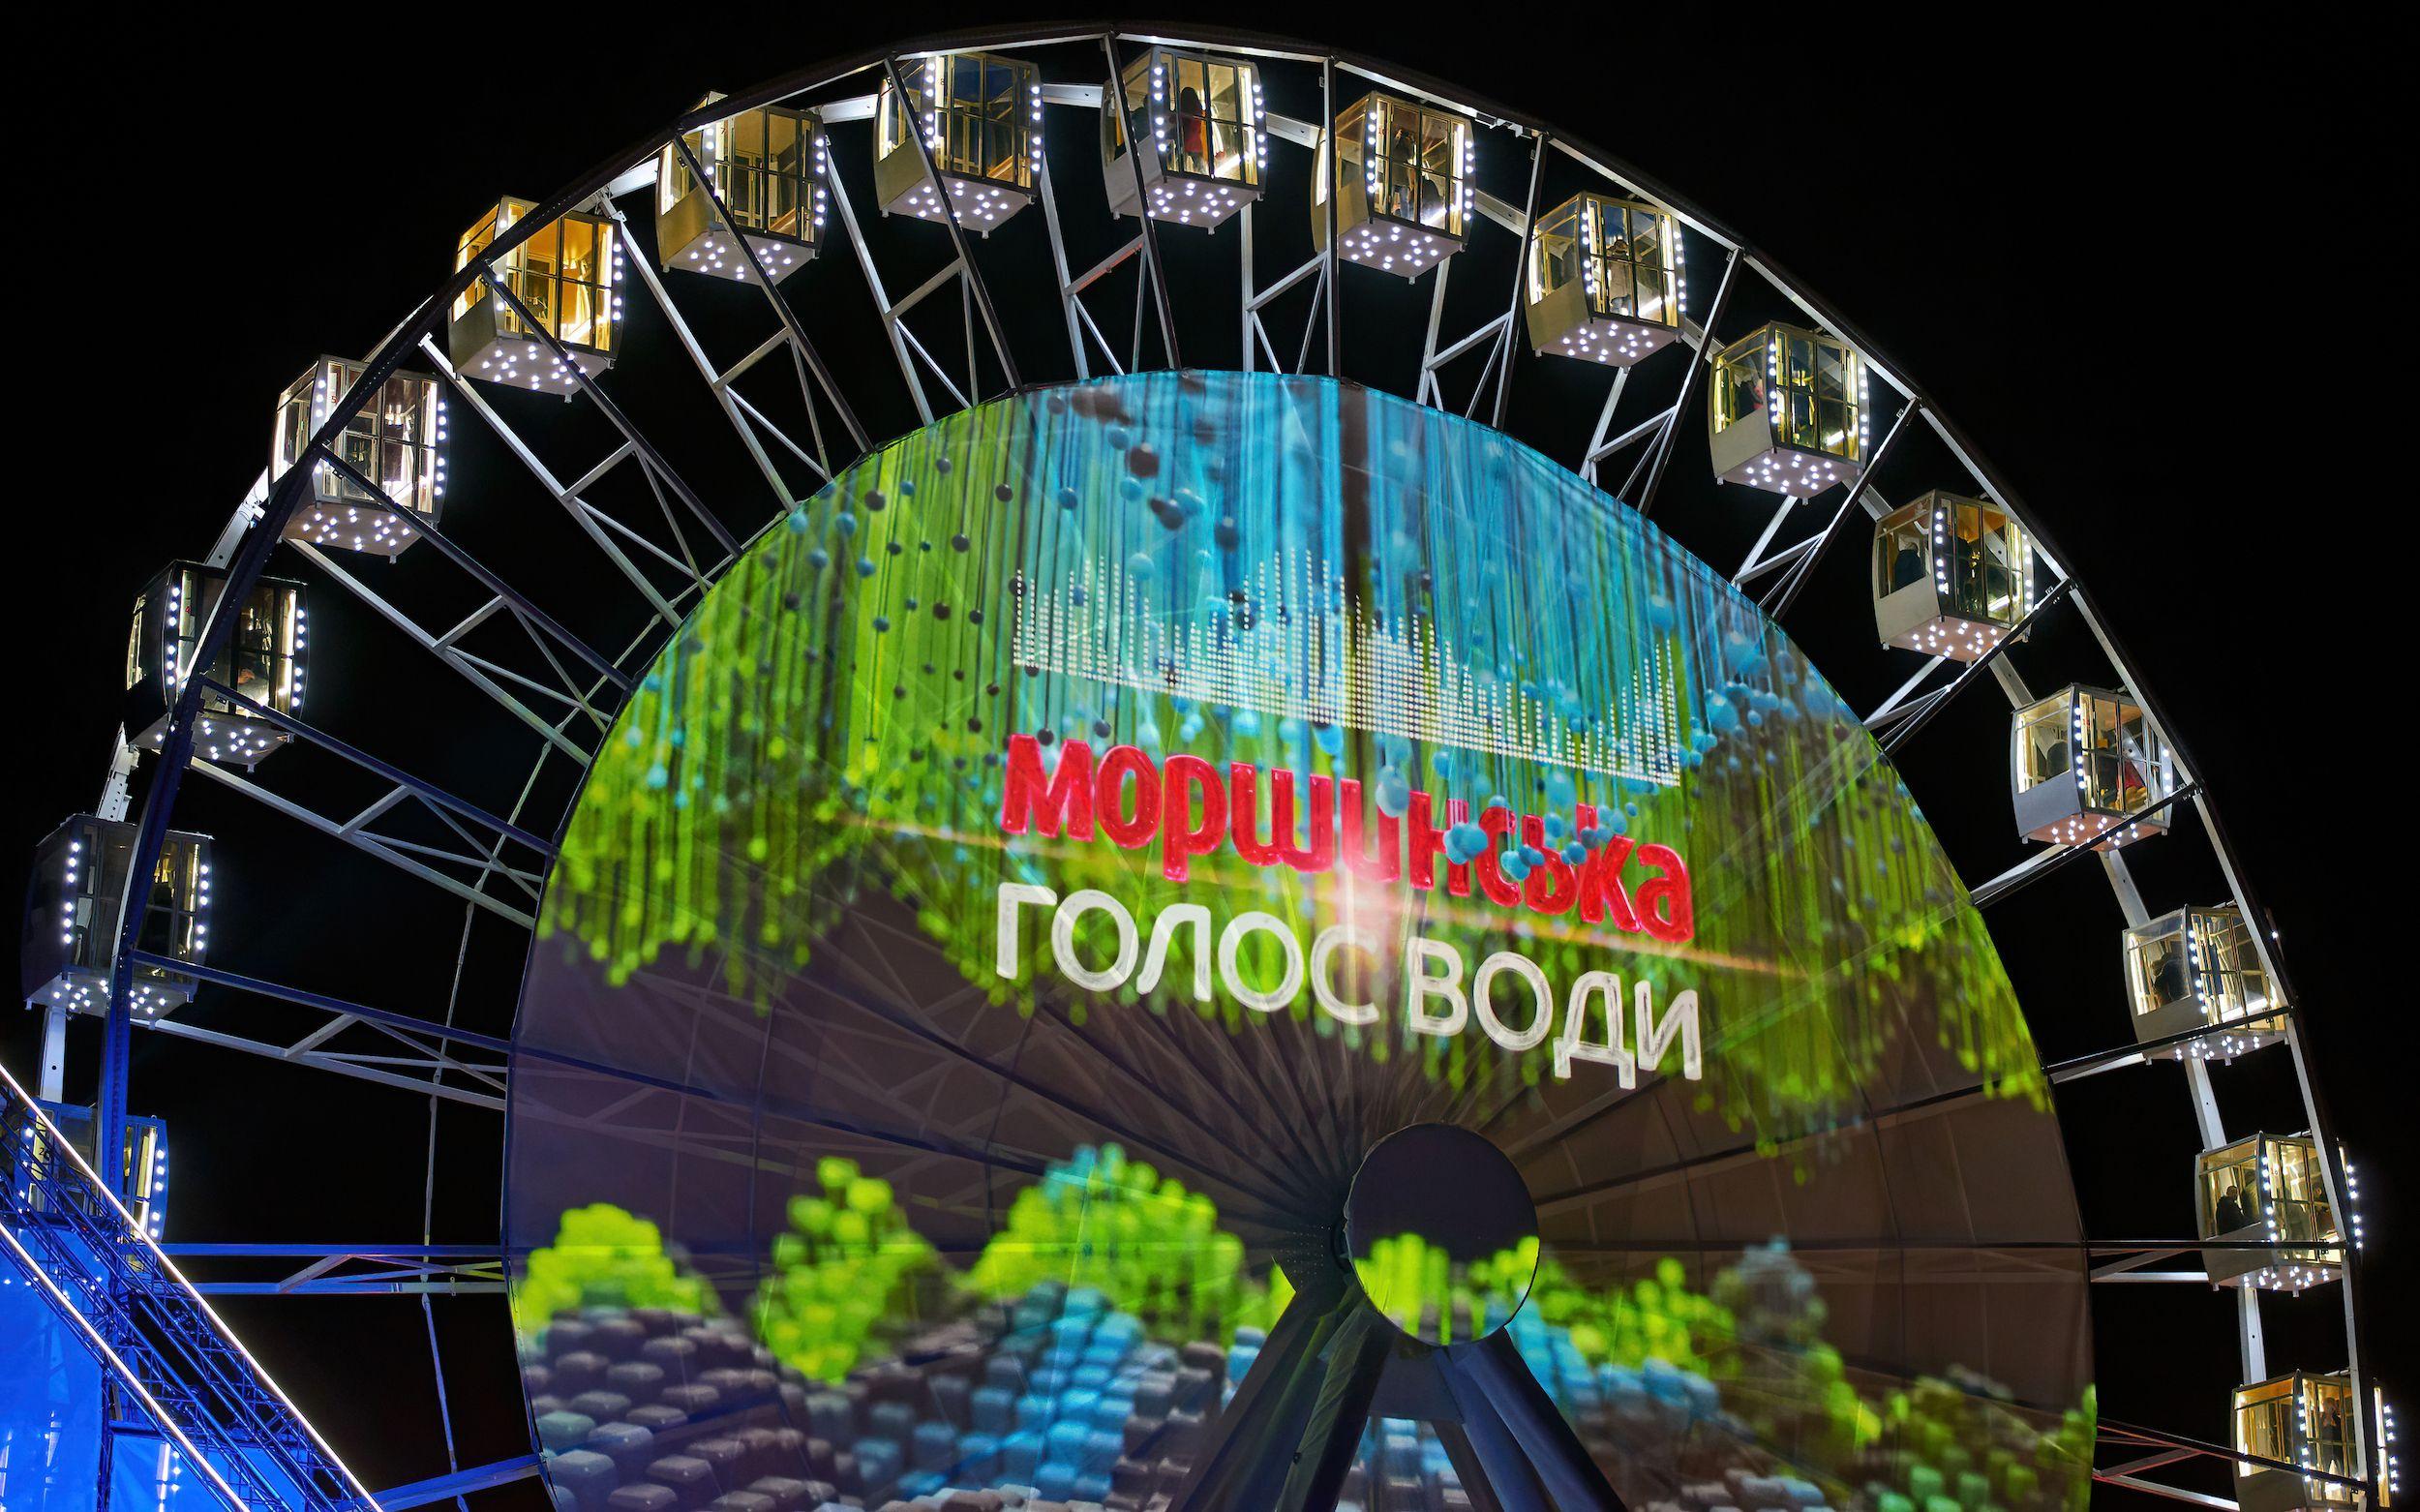 Video mapping onto a Ferris wheel